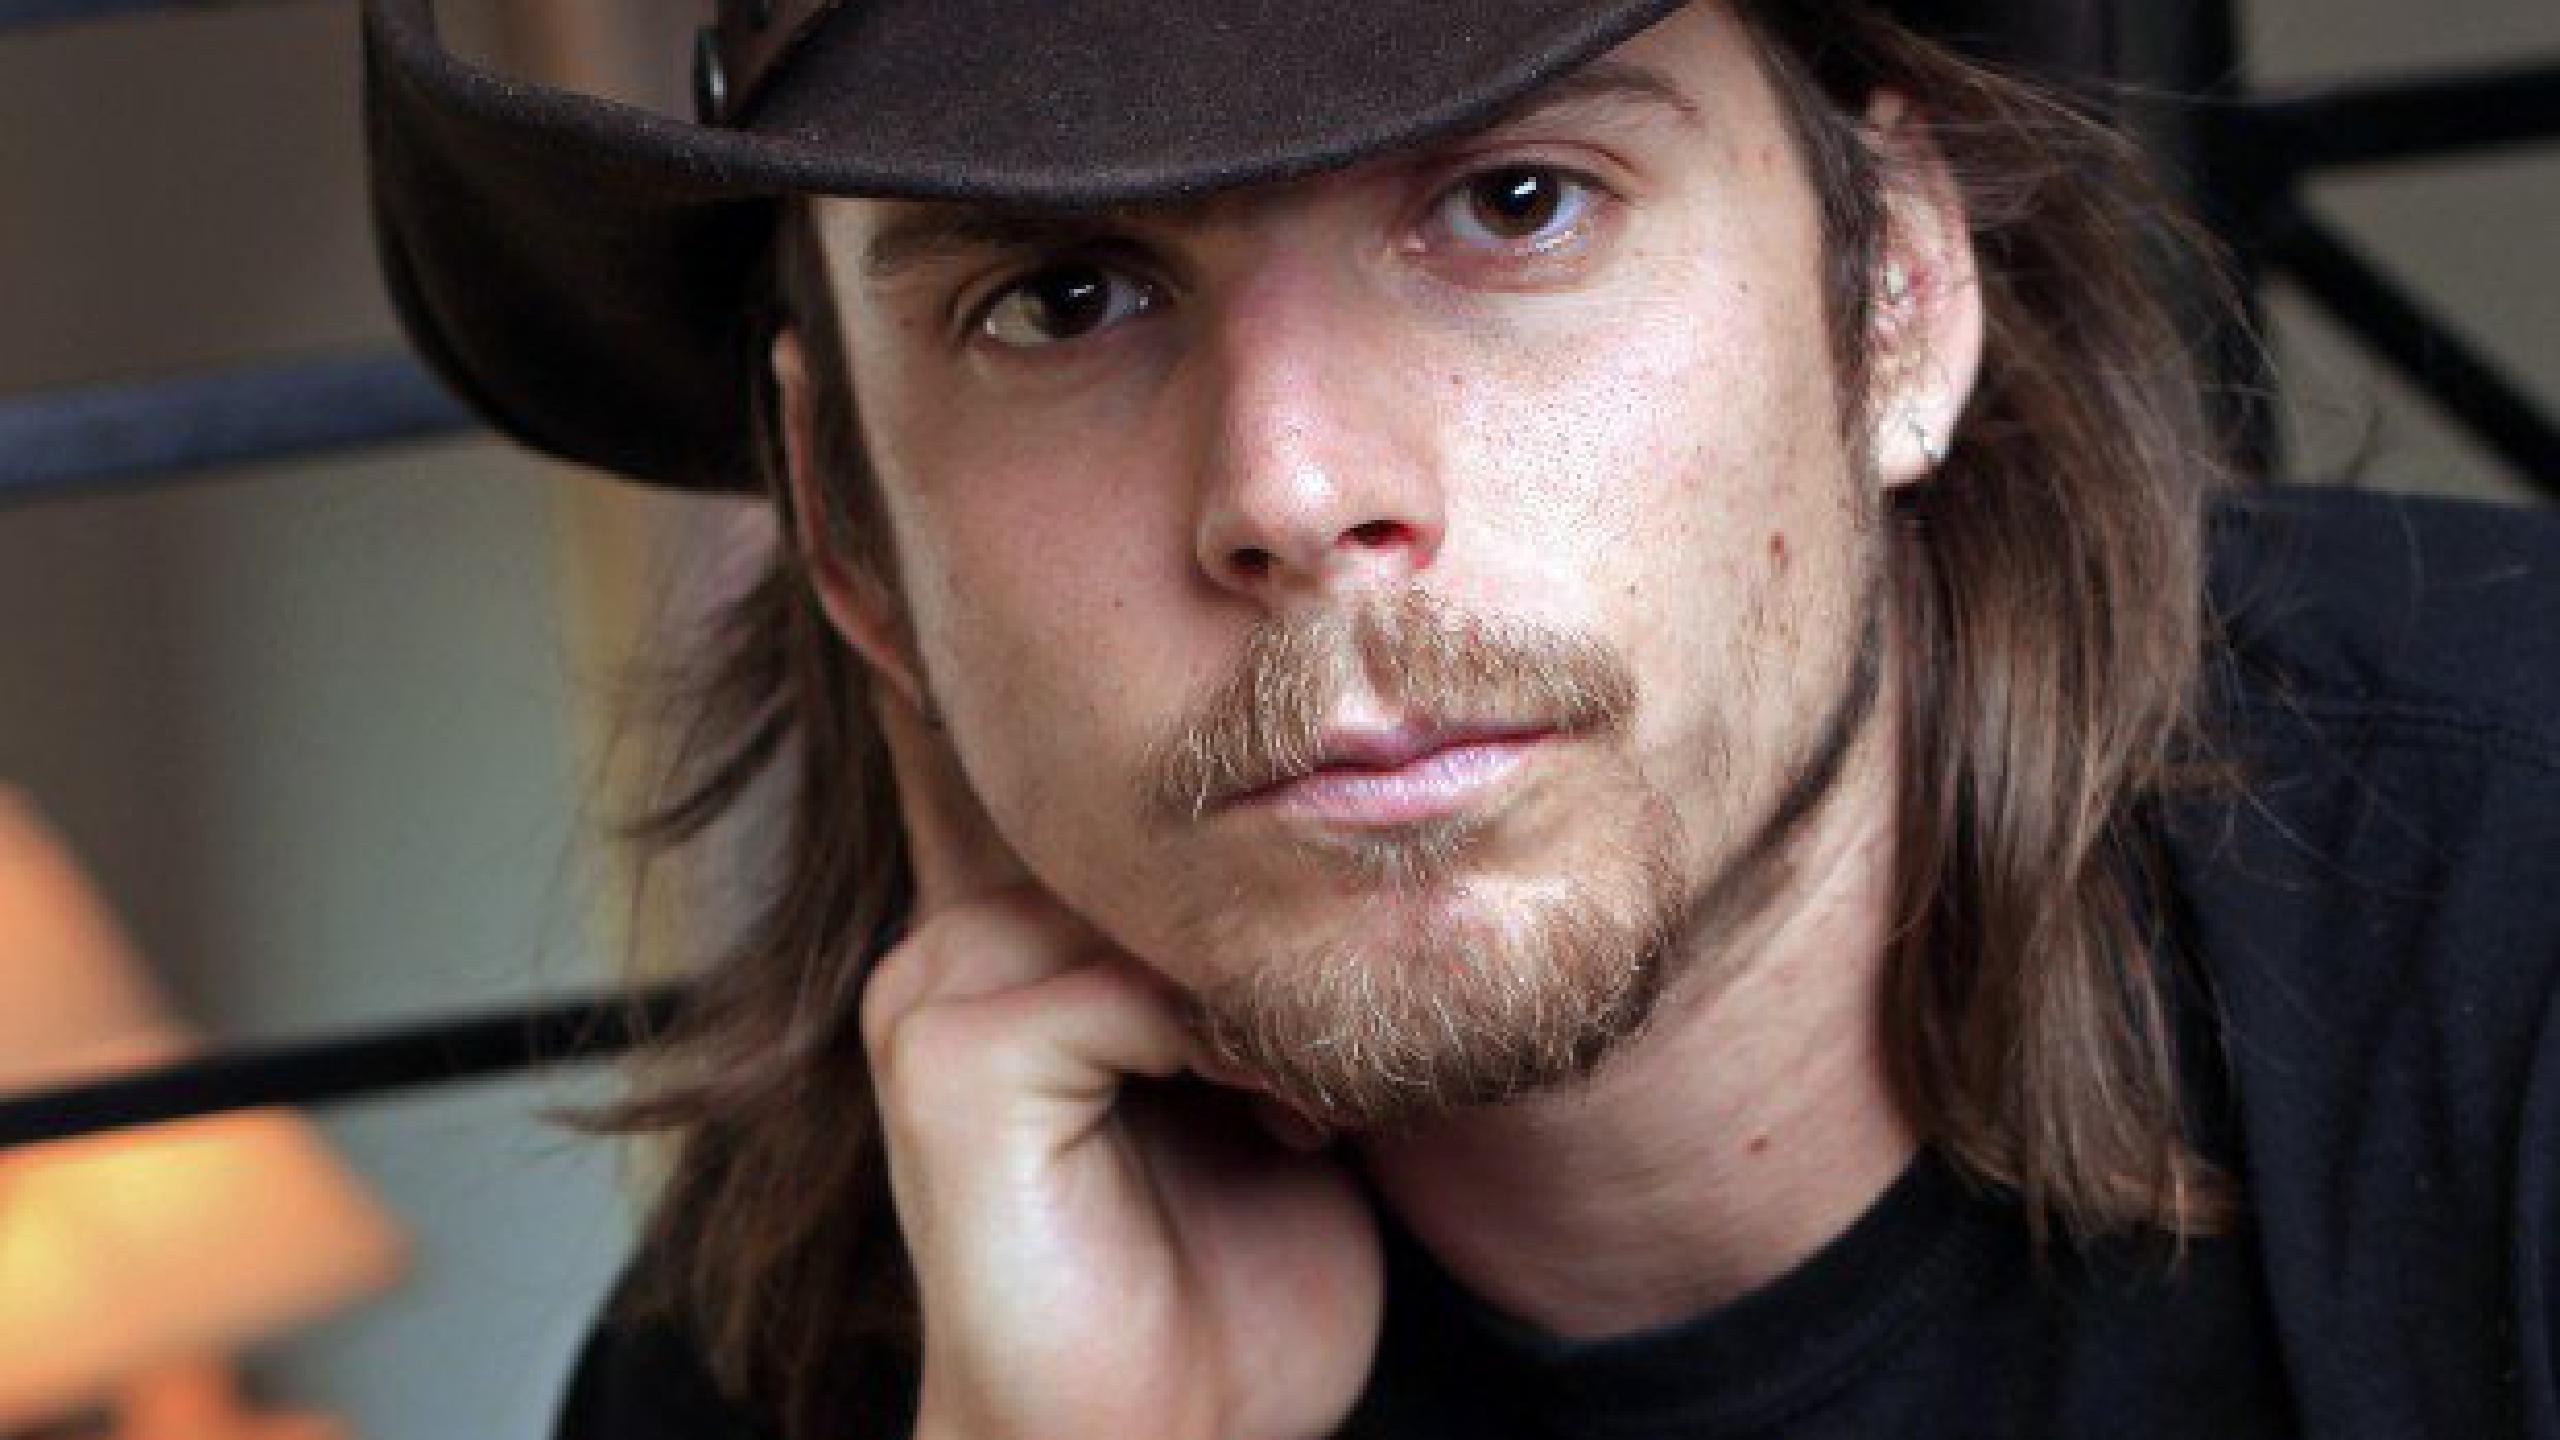 Lukas Nelson tour dates 2022 2023. Lukas Nelson tickets and concerts